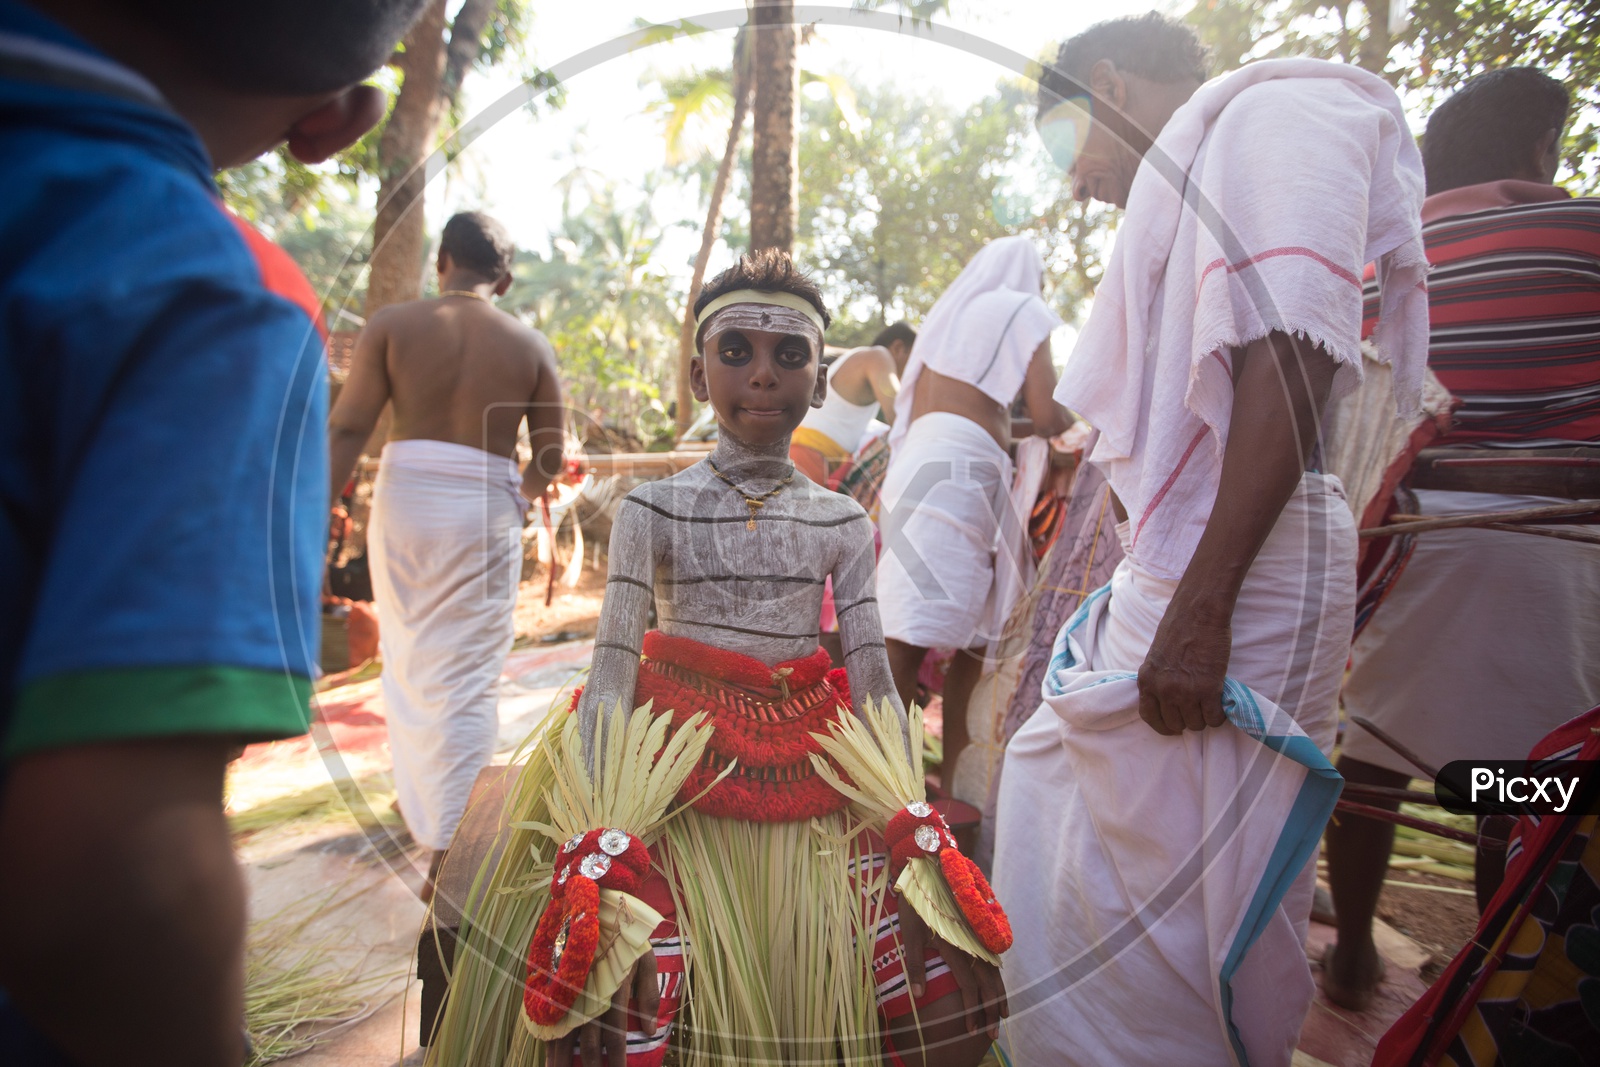 A Small Boy Theyyam Artists In Makeup For Performance , A  Ritualistic Dance Art Form  in Kerala